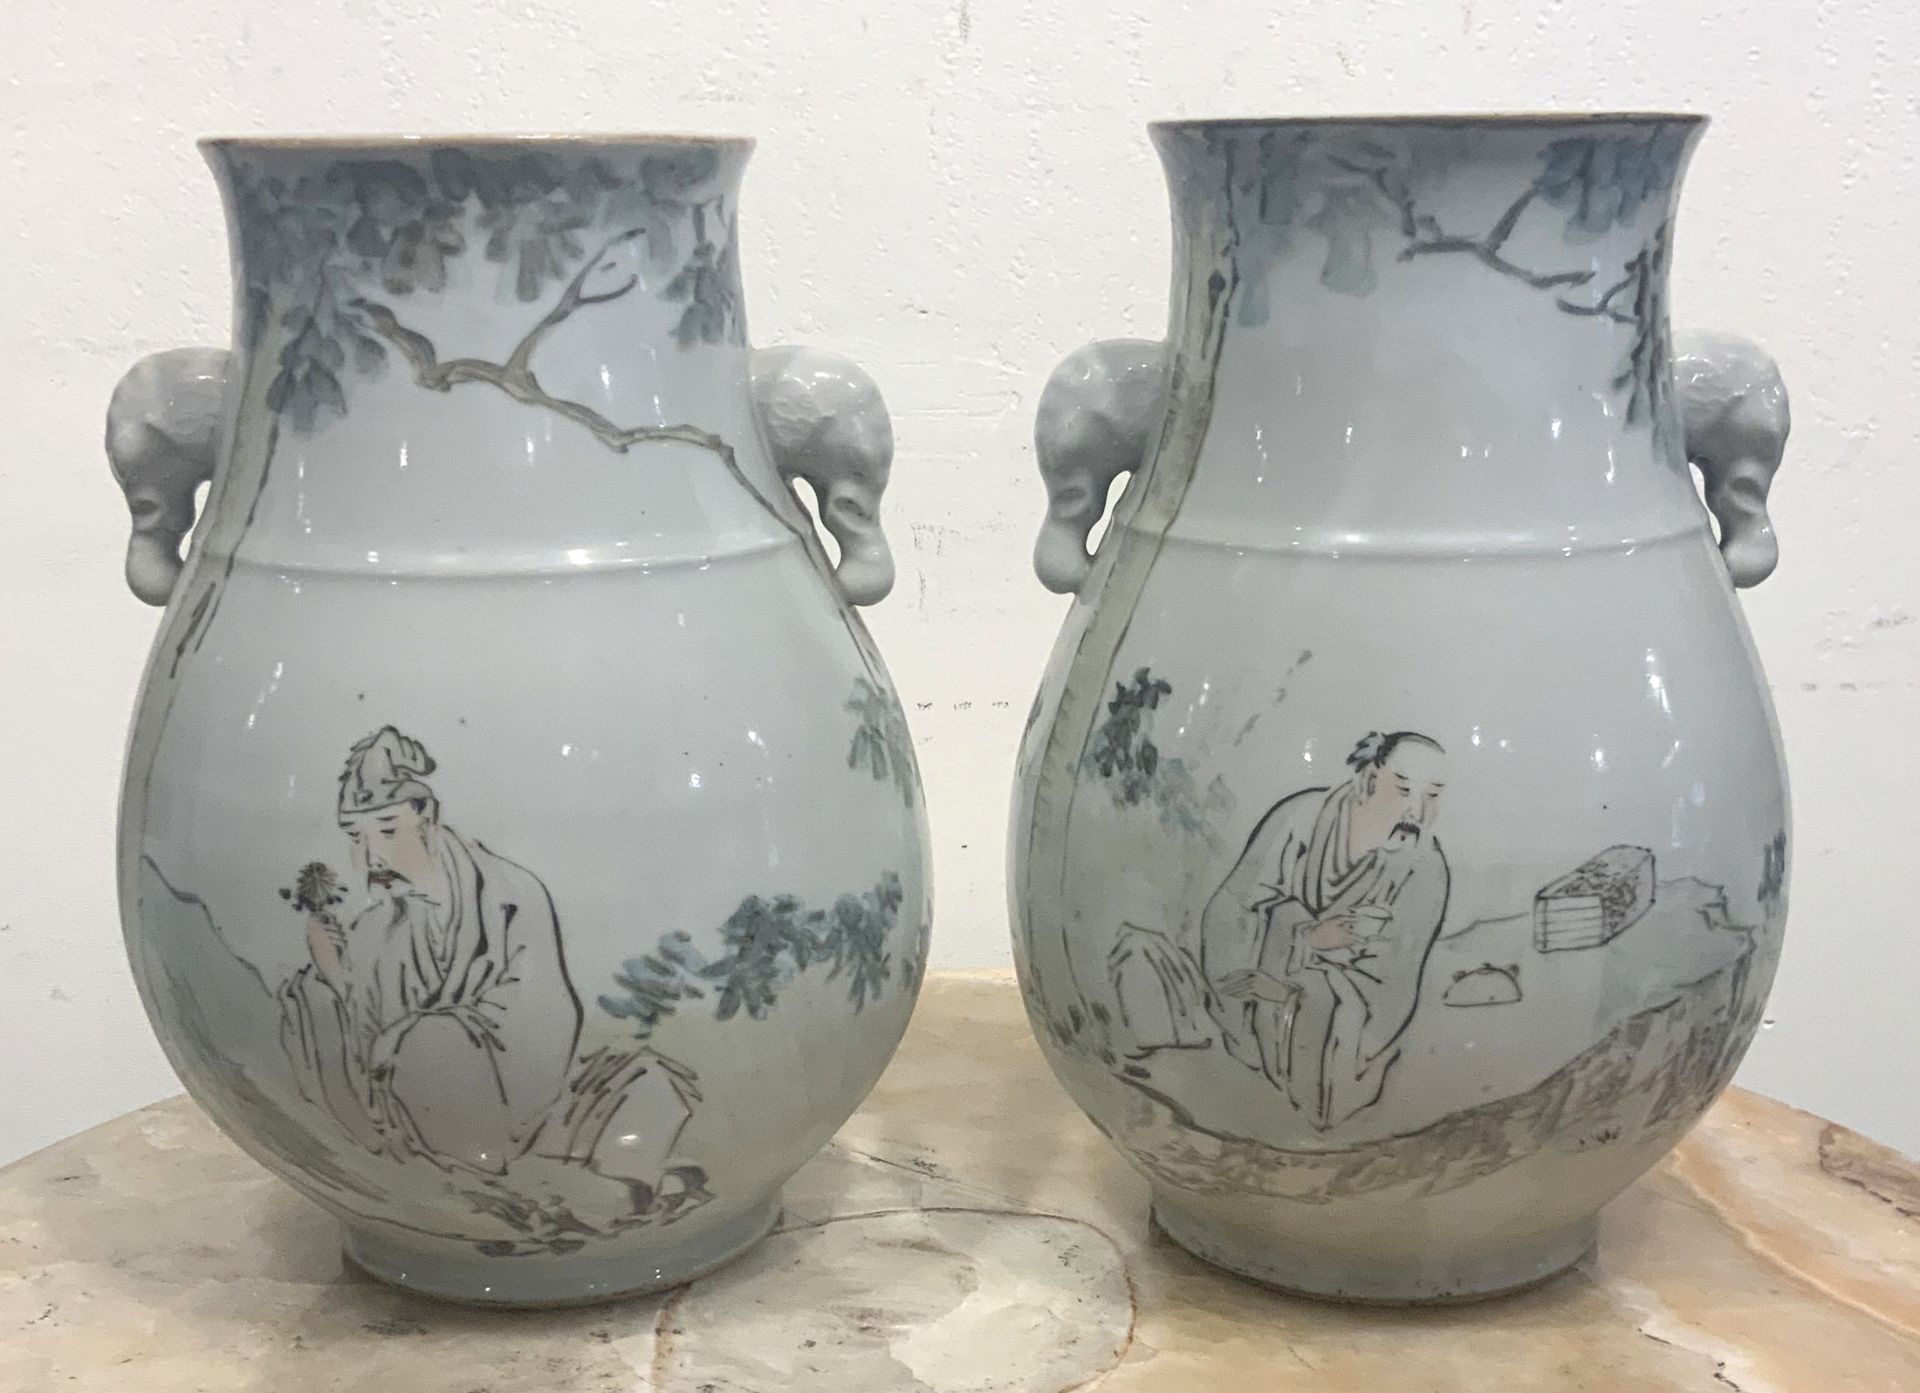 Pair of porcelain vases. Rose family. Ching period.